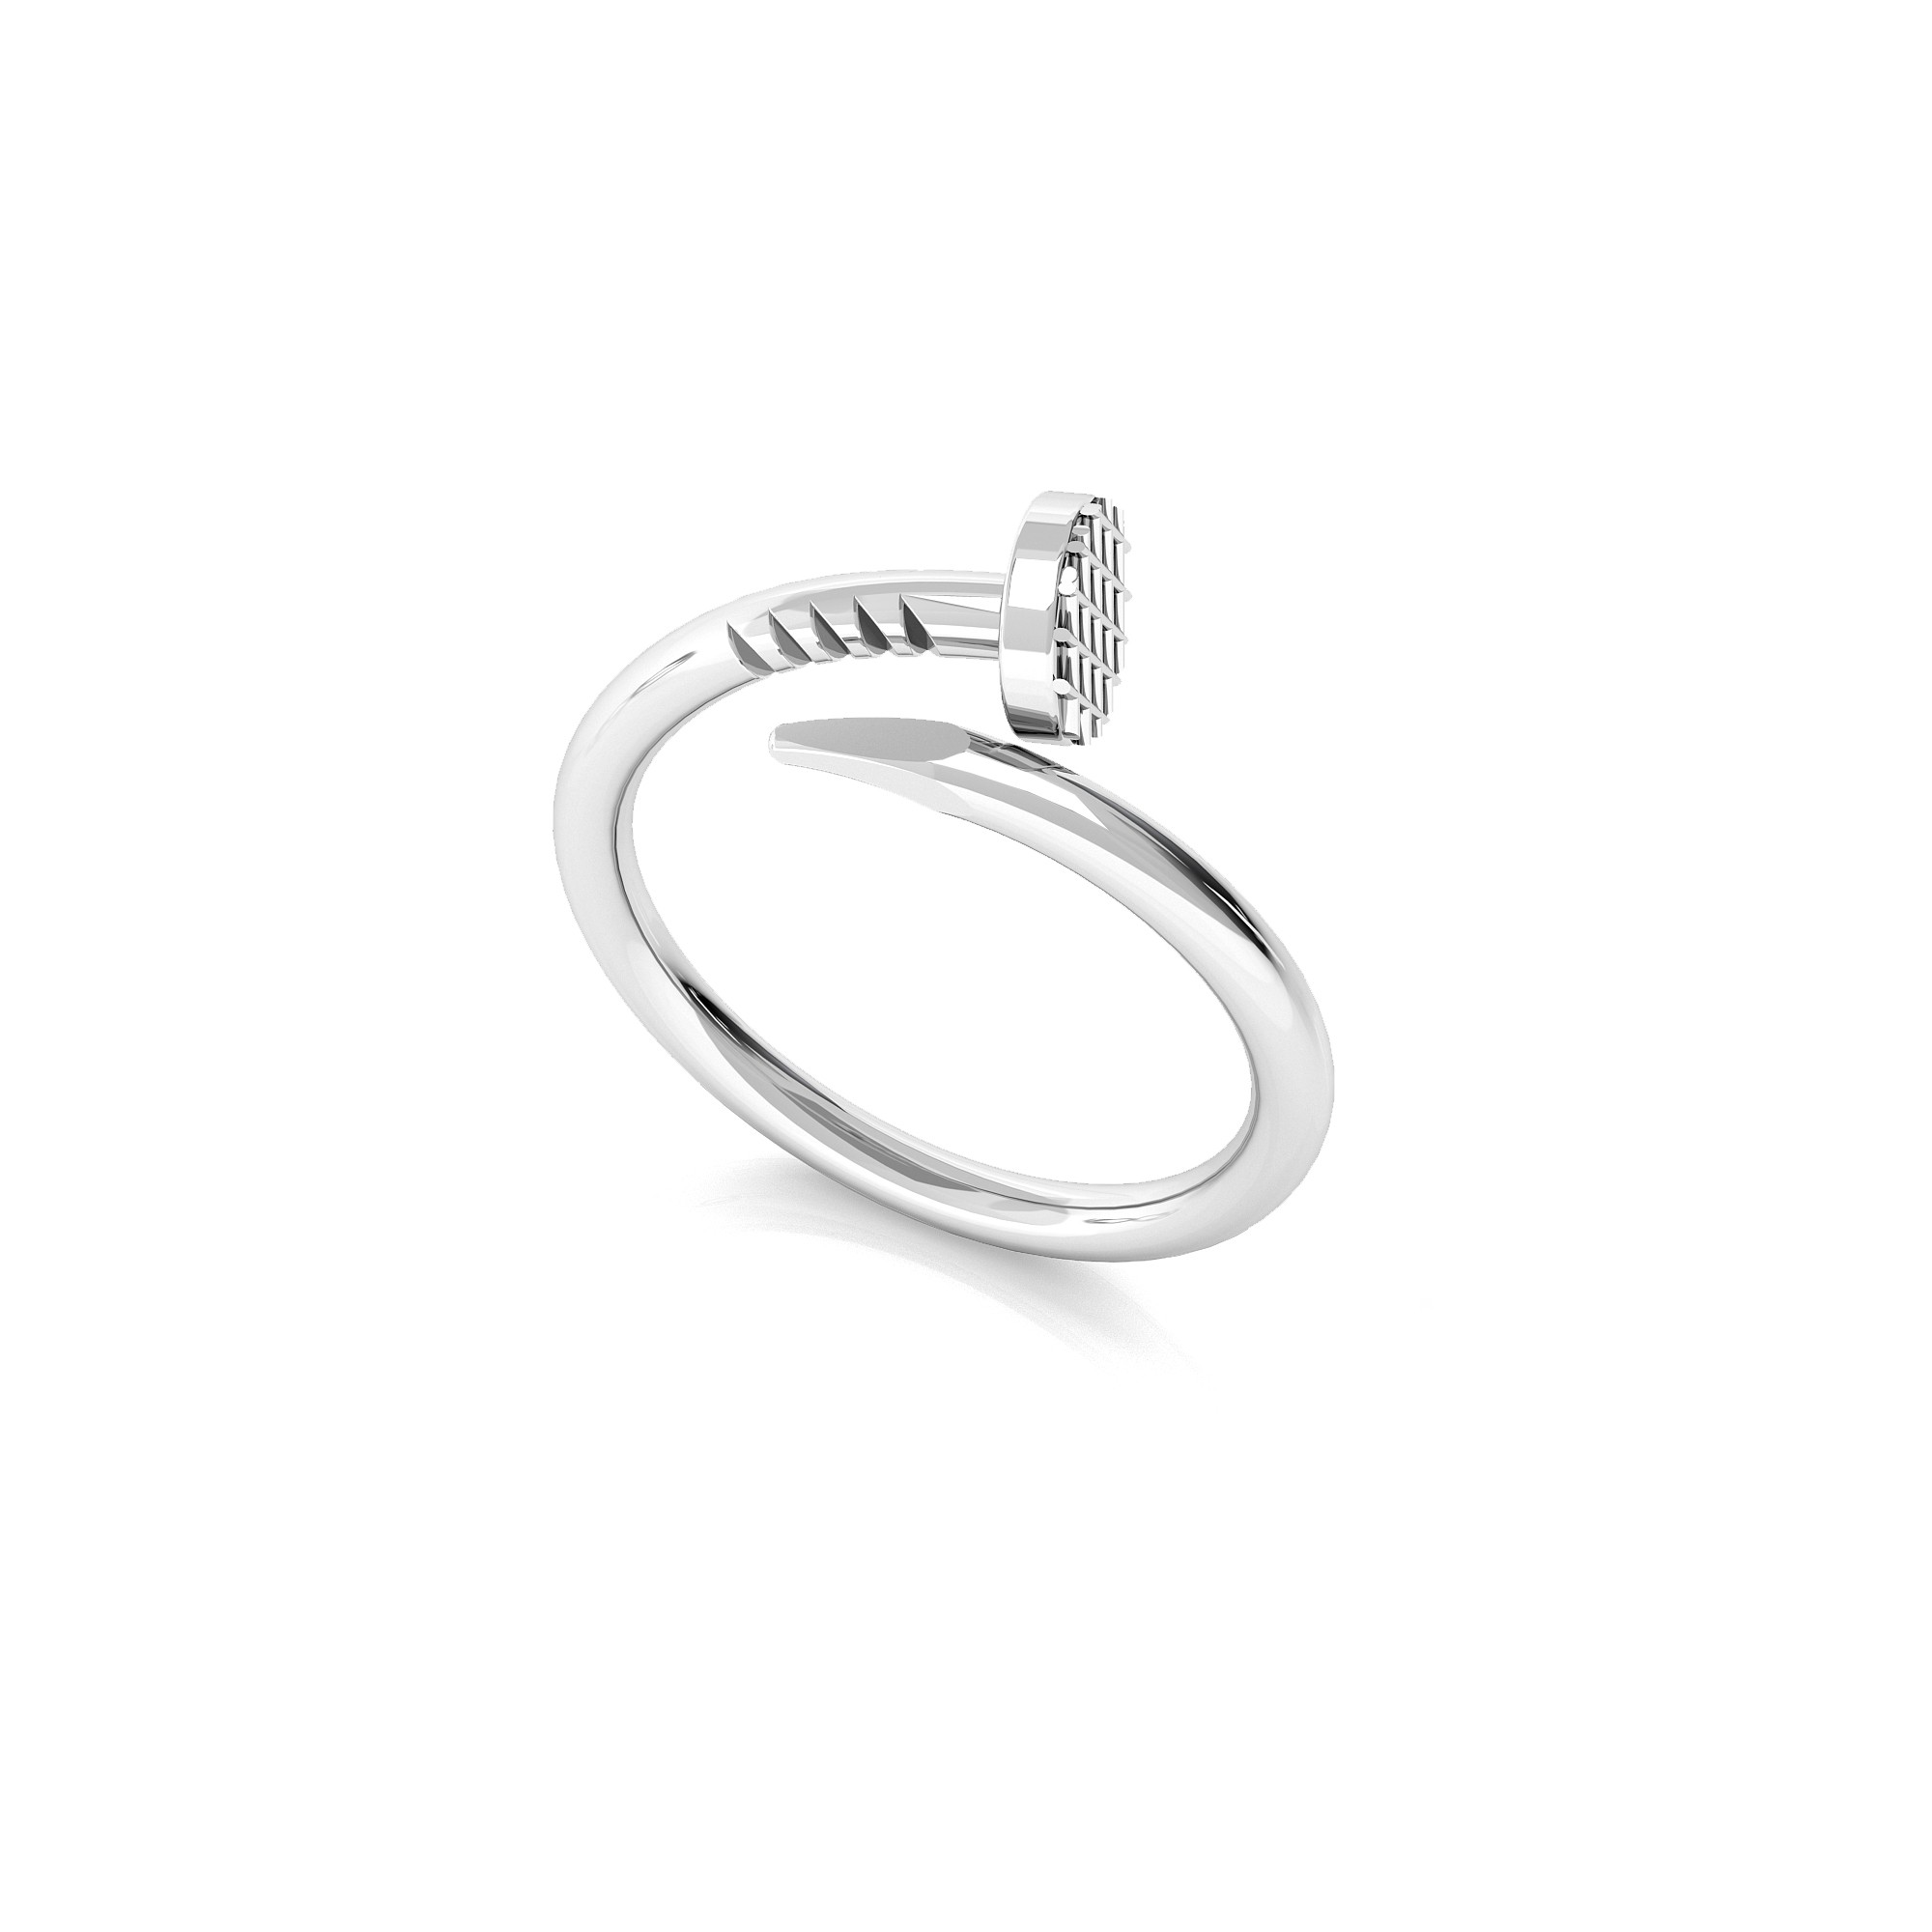 Spike ring, silver 925